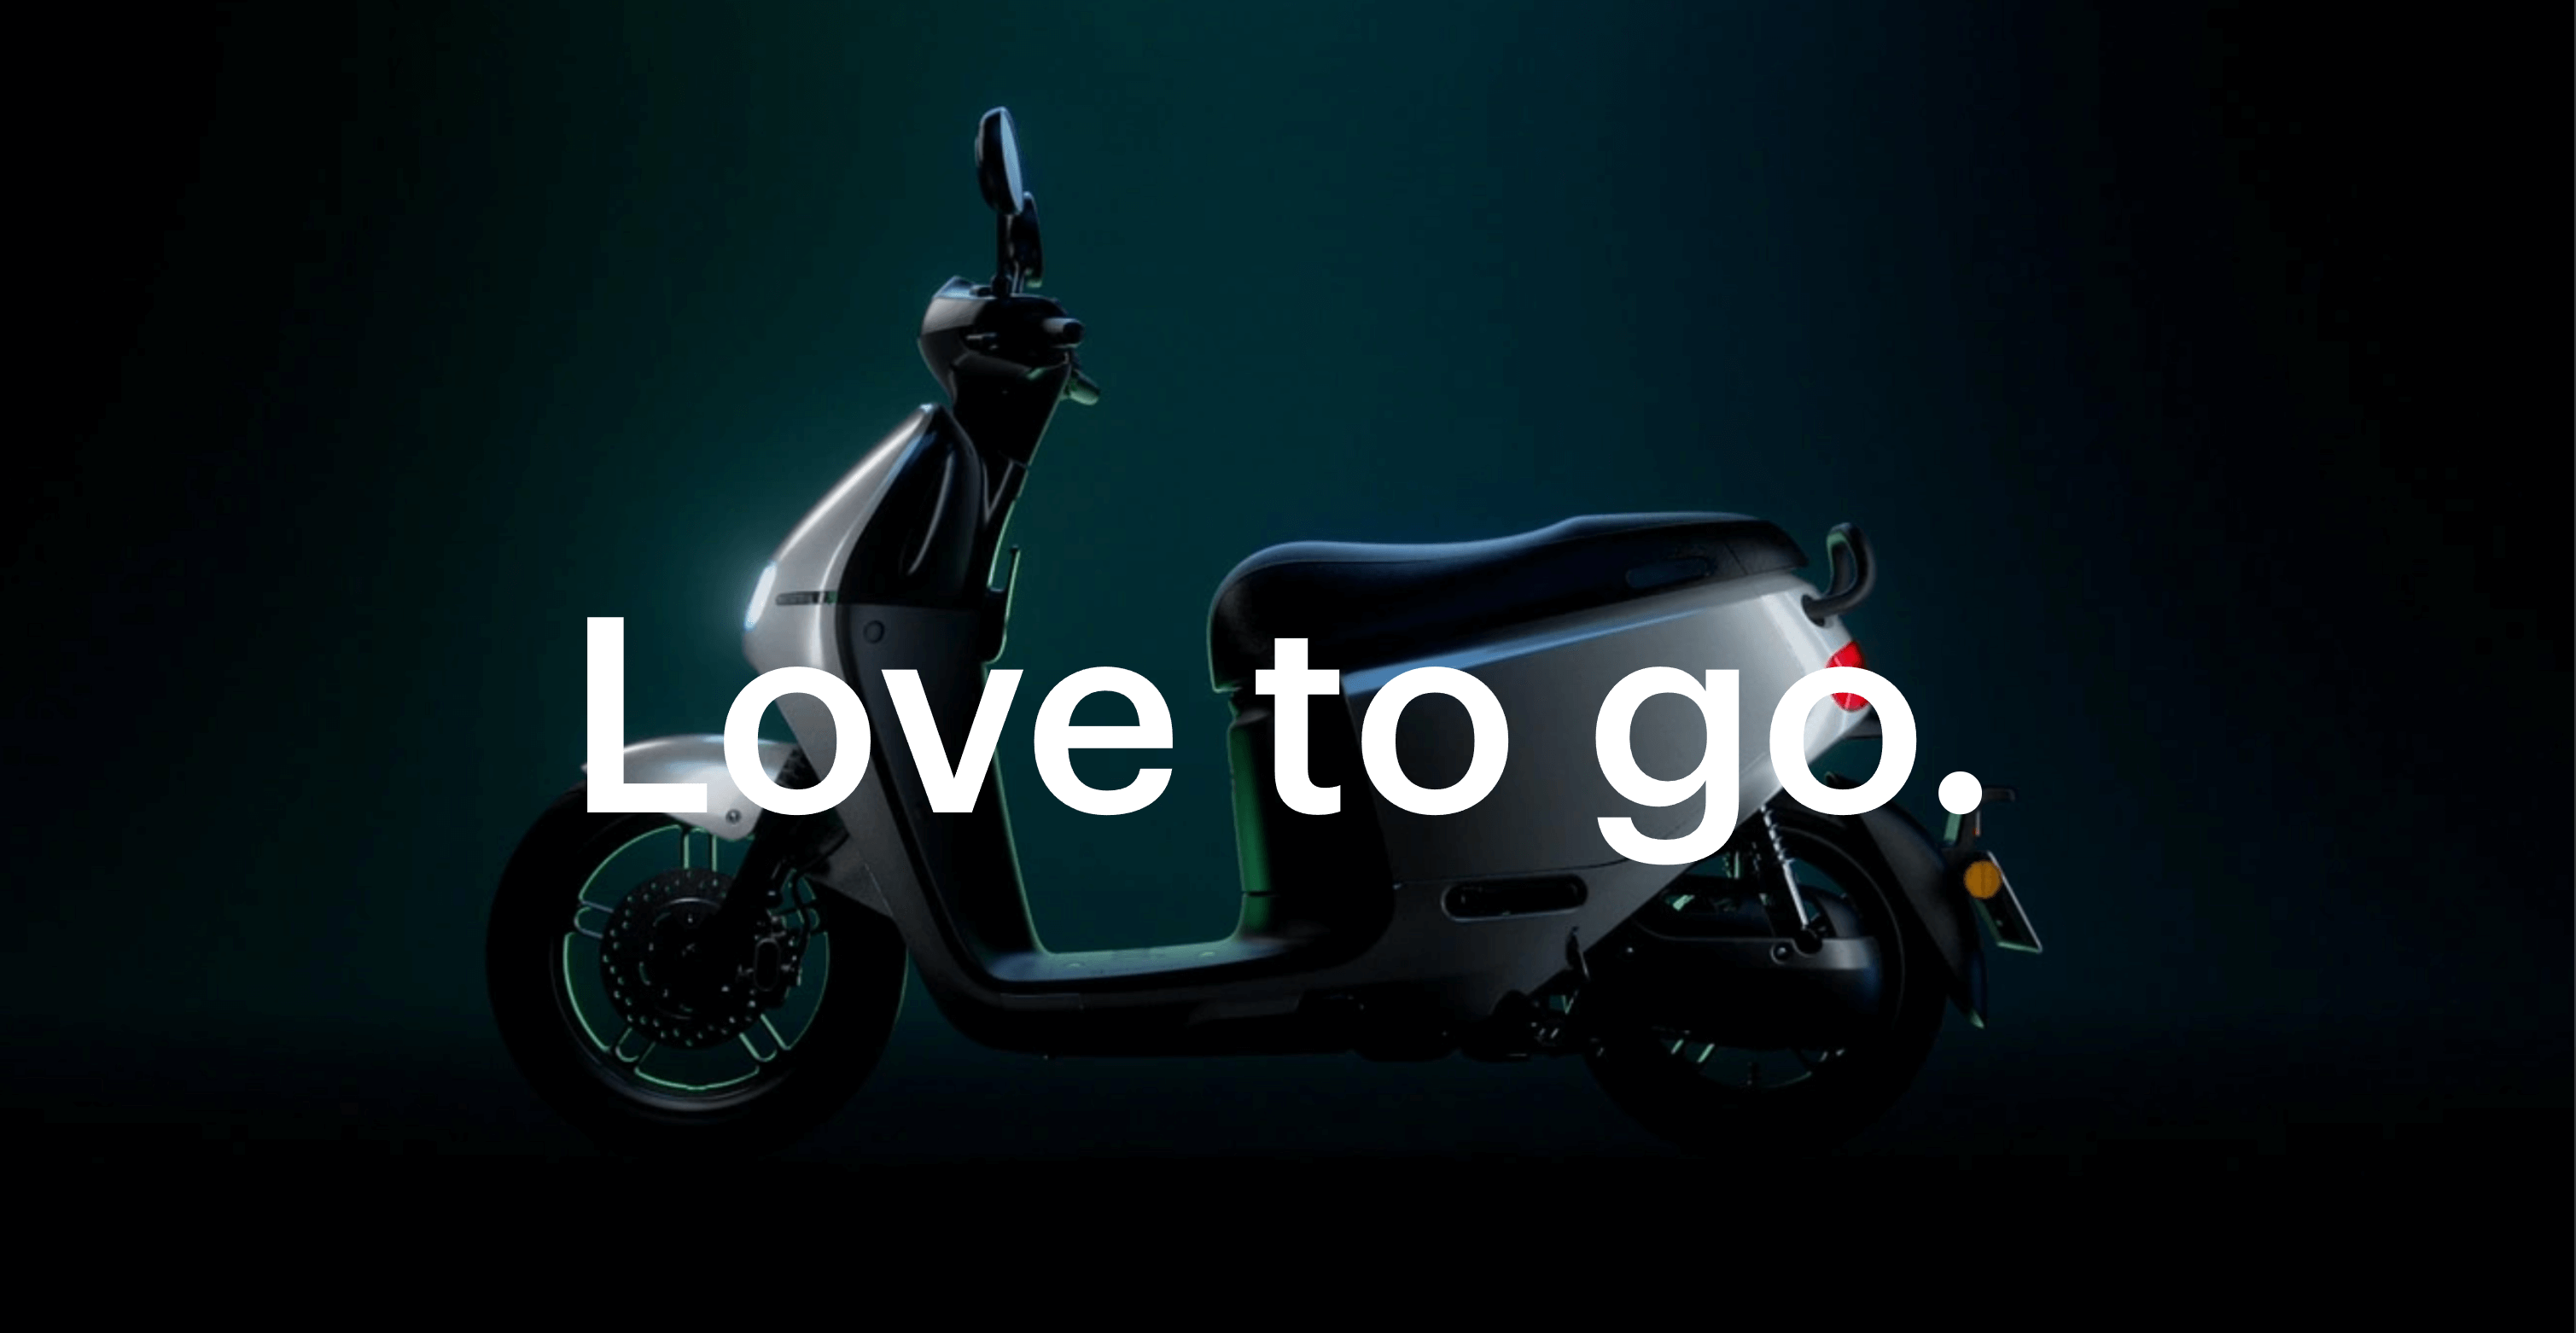 The homepage for Gogoro 